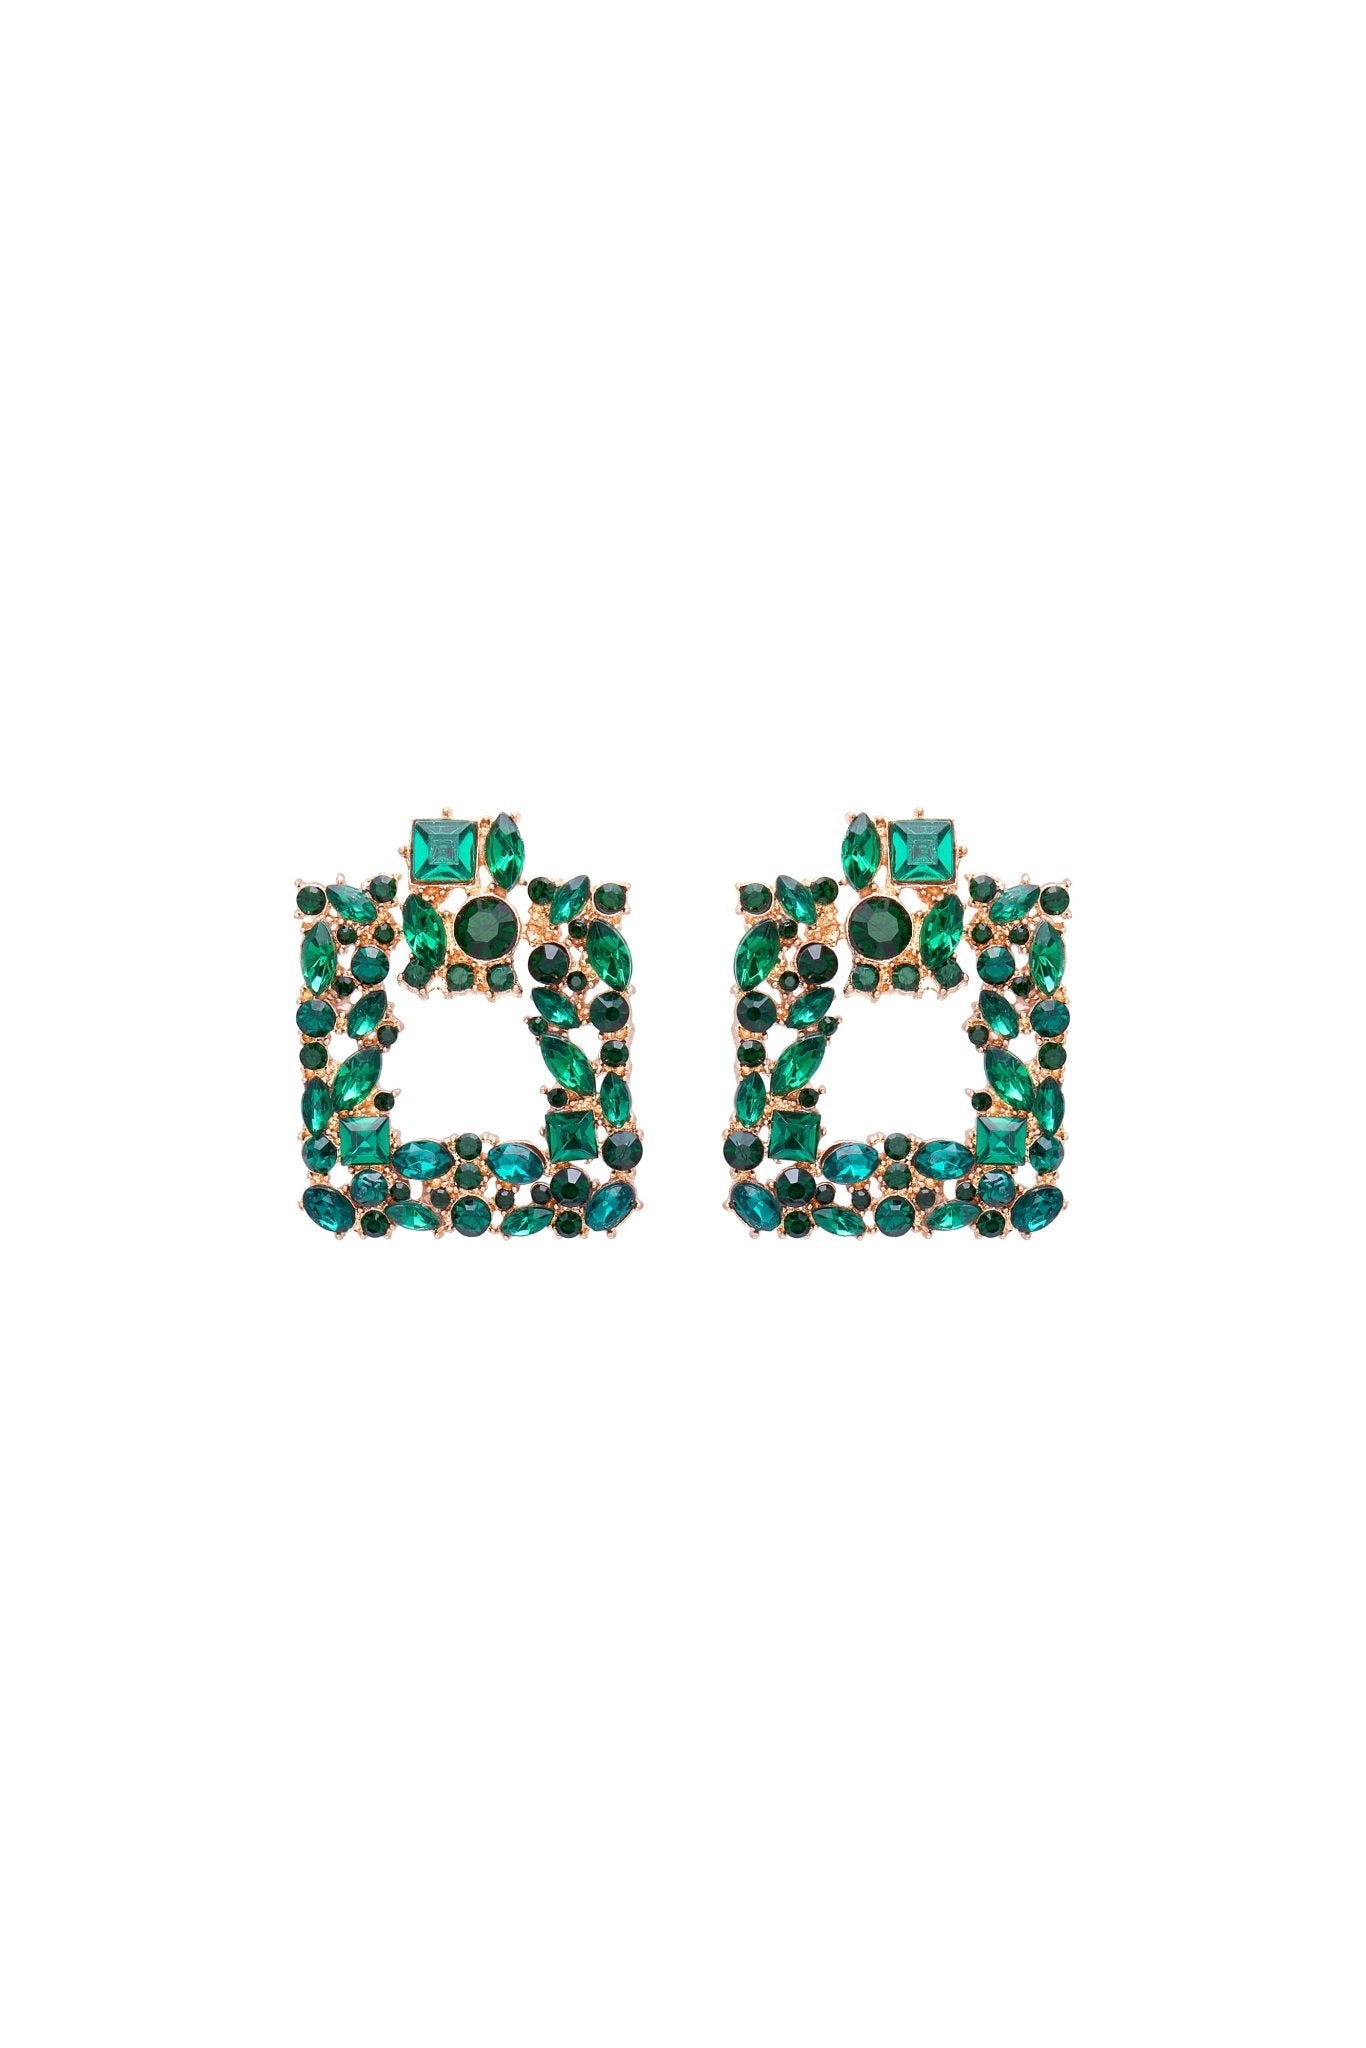 Linda Square Drop Earrings - YG COLLECTION